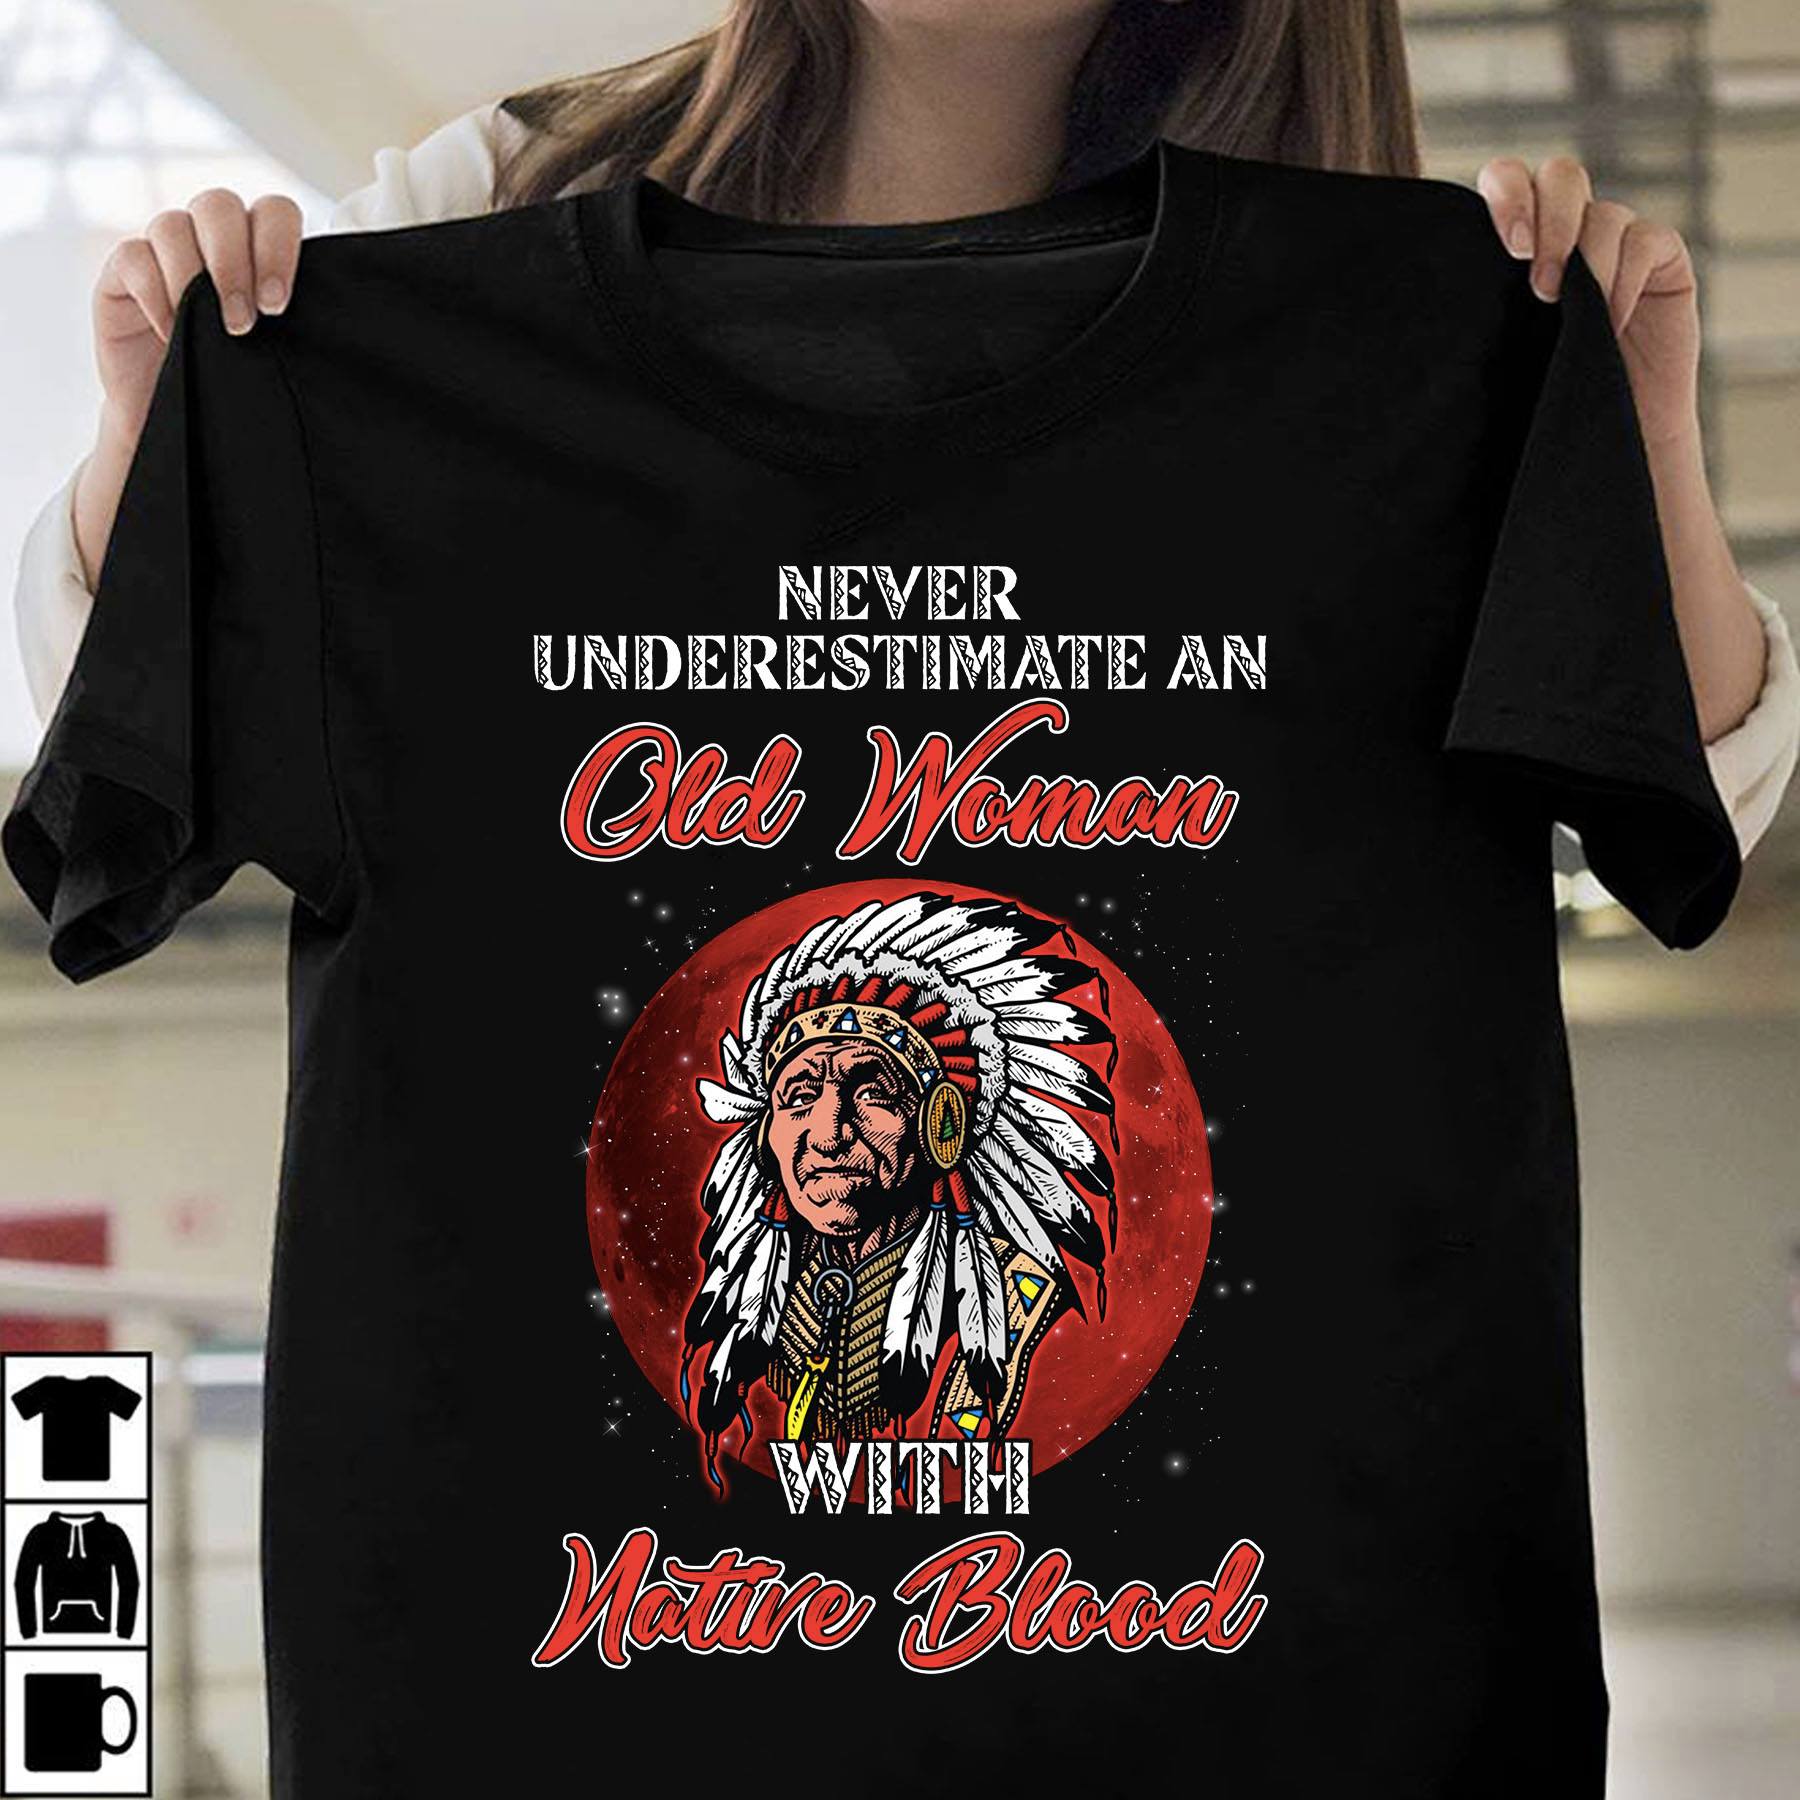 Never underestimate an old woman with native blood